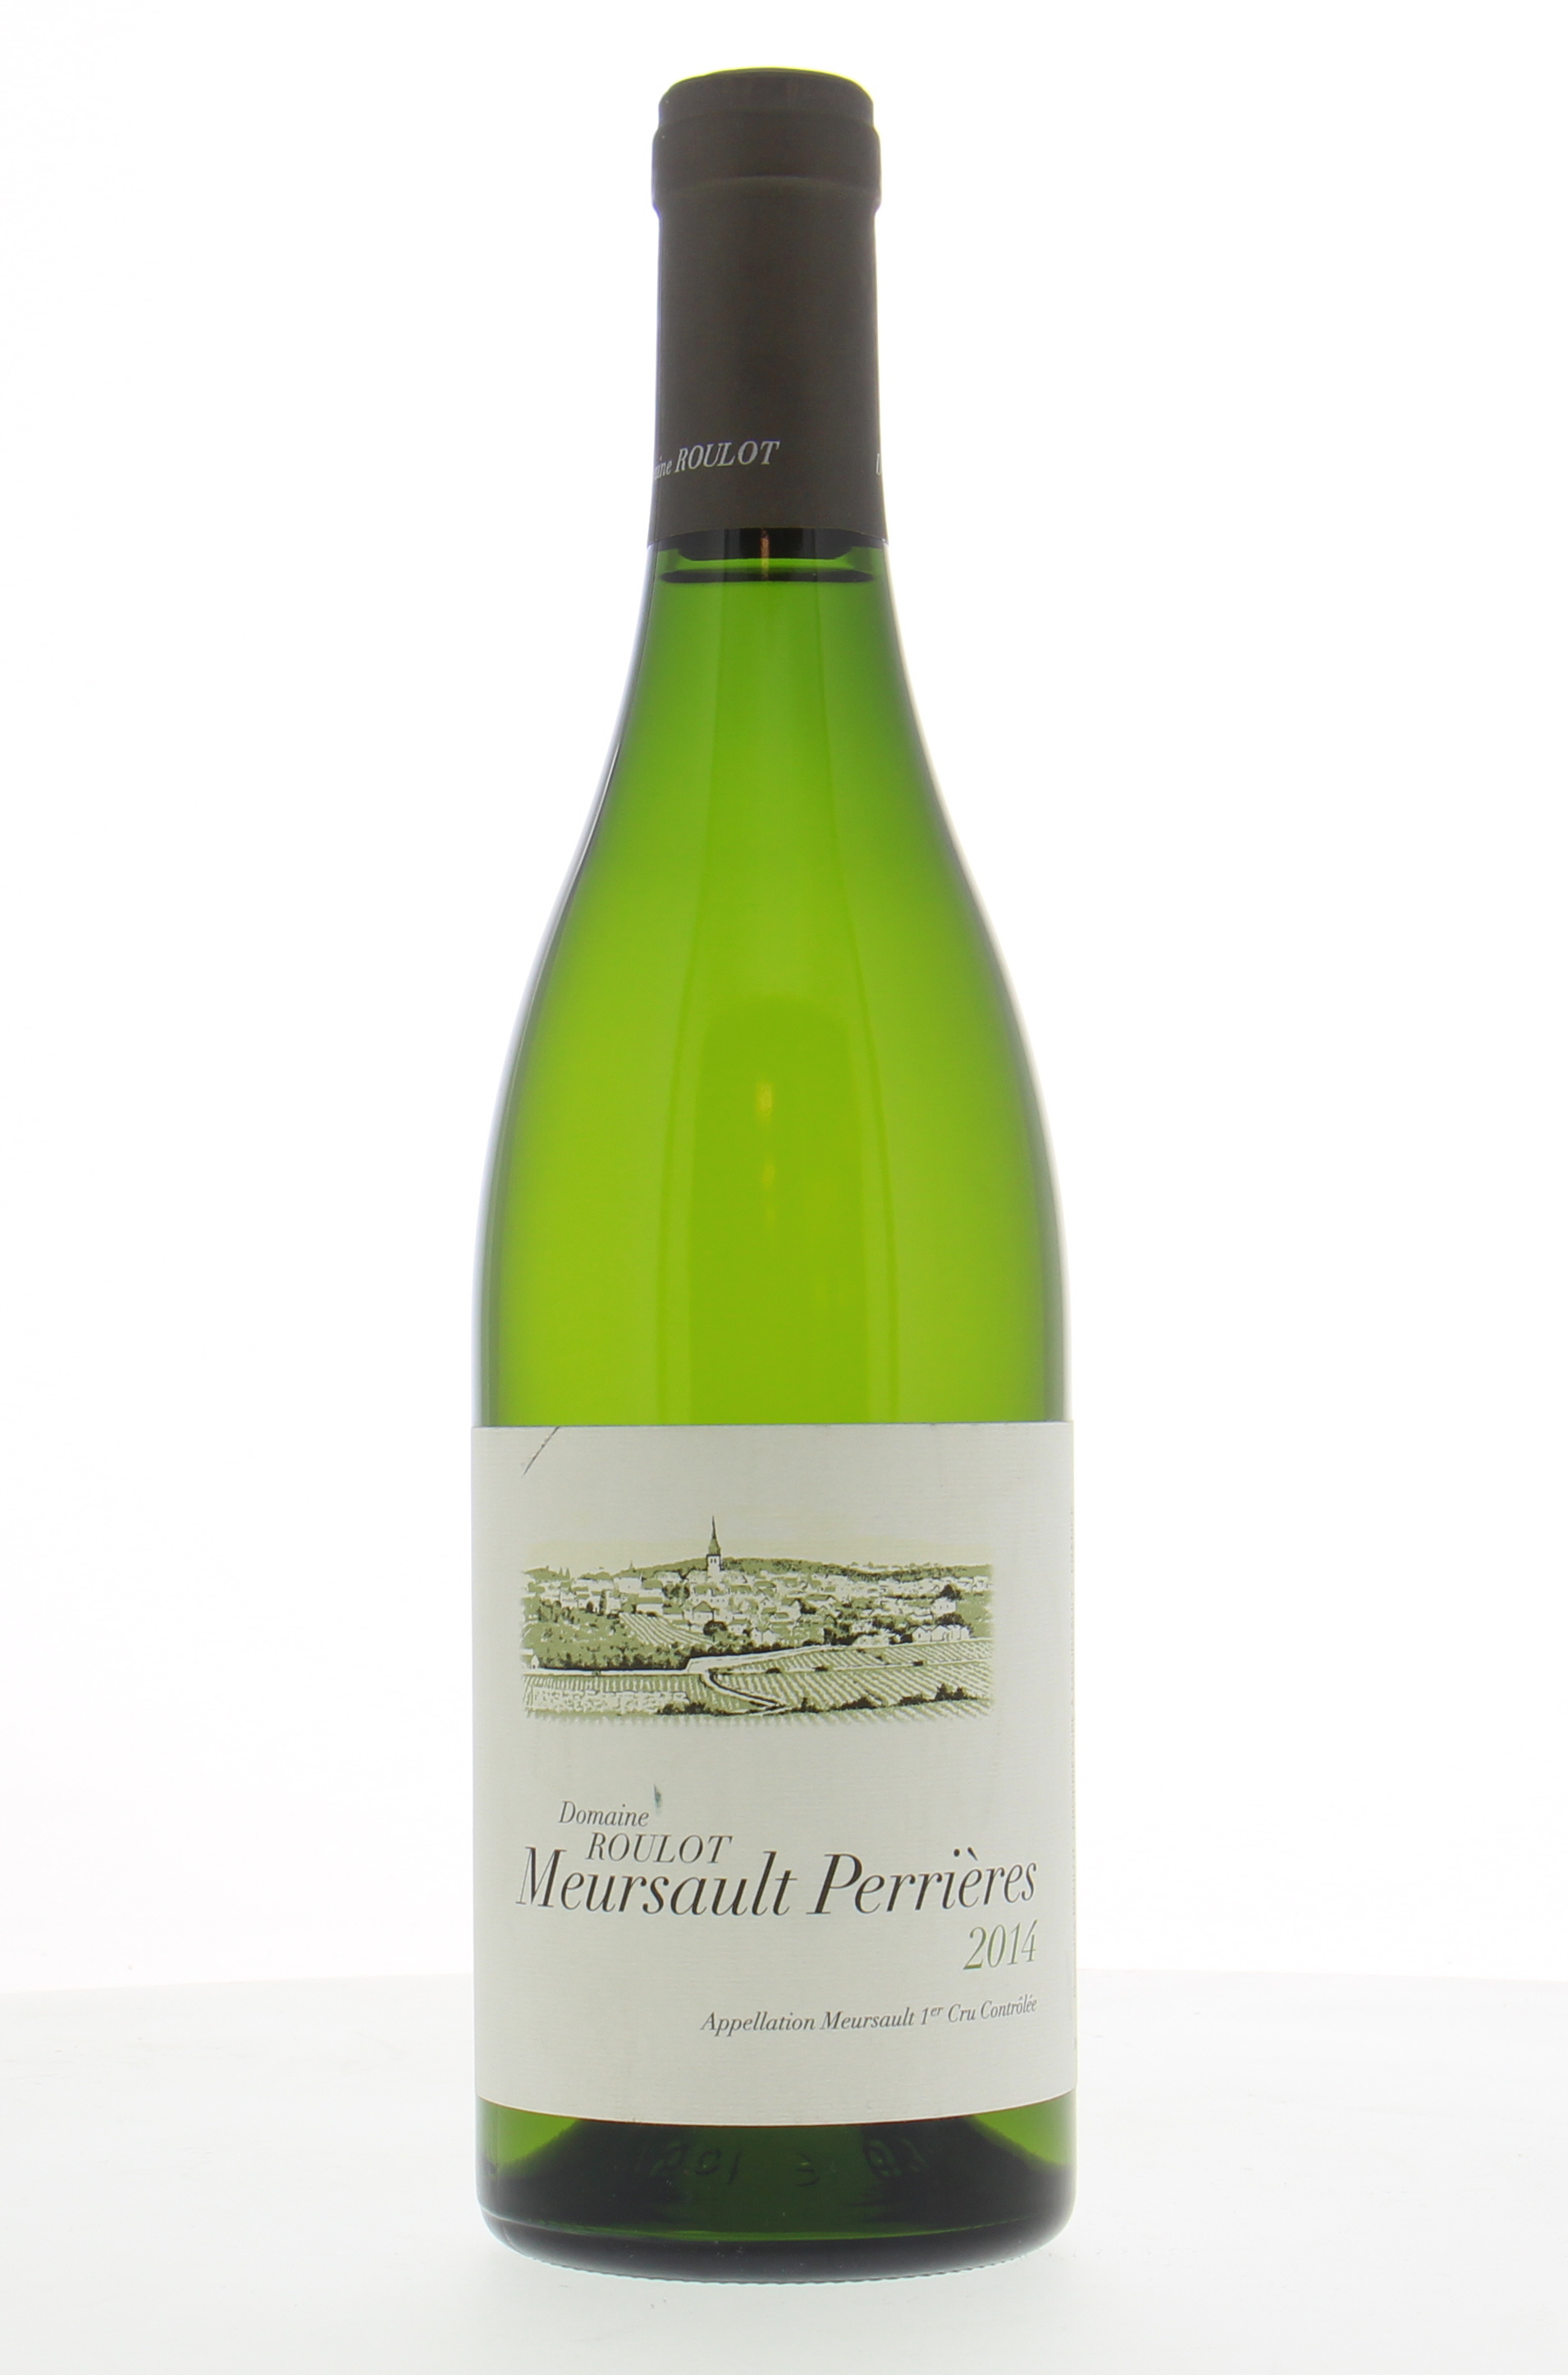 Guy Roulot - Meursault Les Perrieres 2014 Perfect